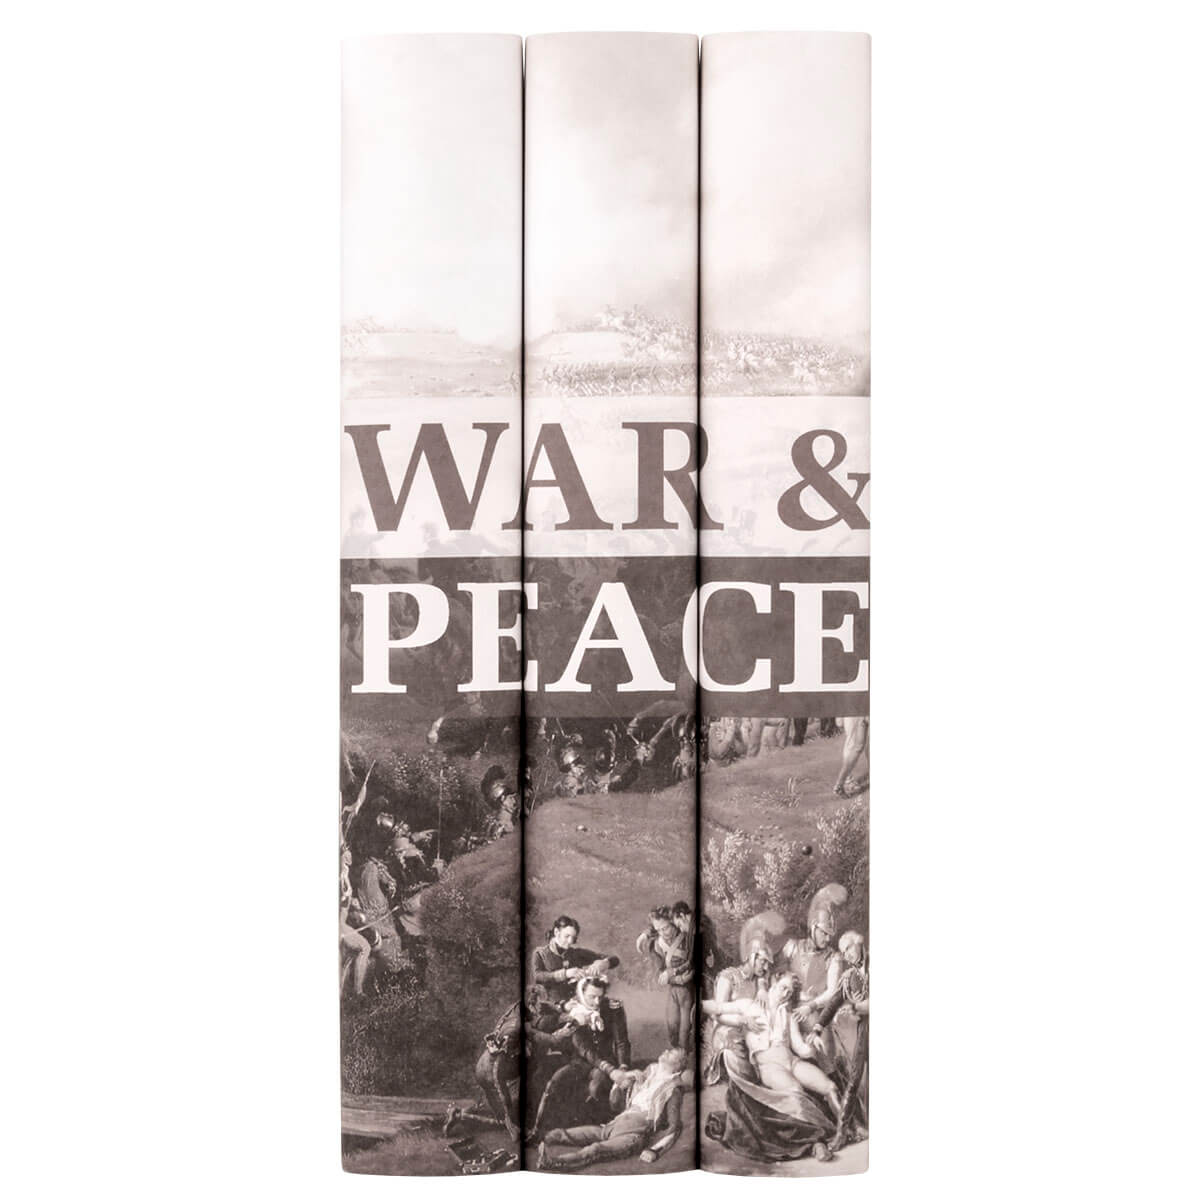 ELWP3-tolstoys-war-and-peace-front-1200_1.jpg